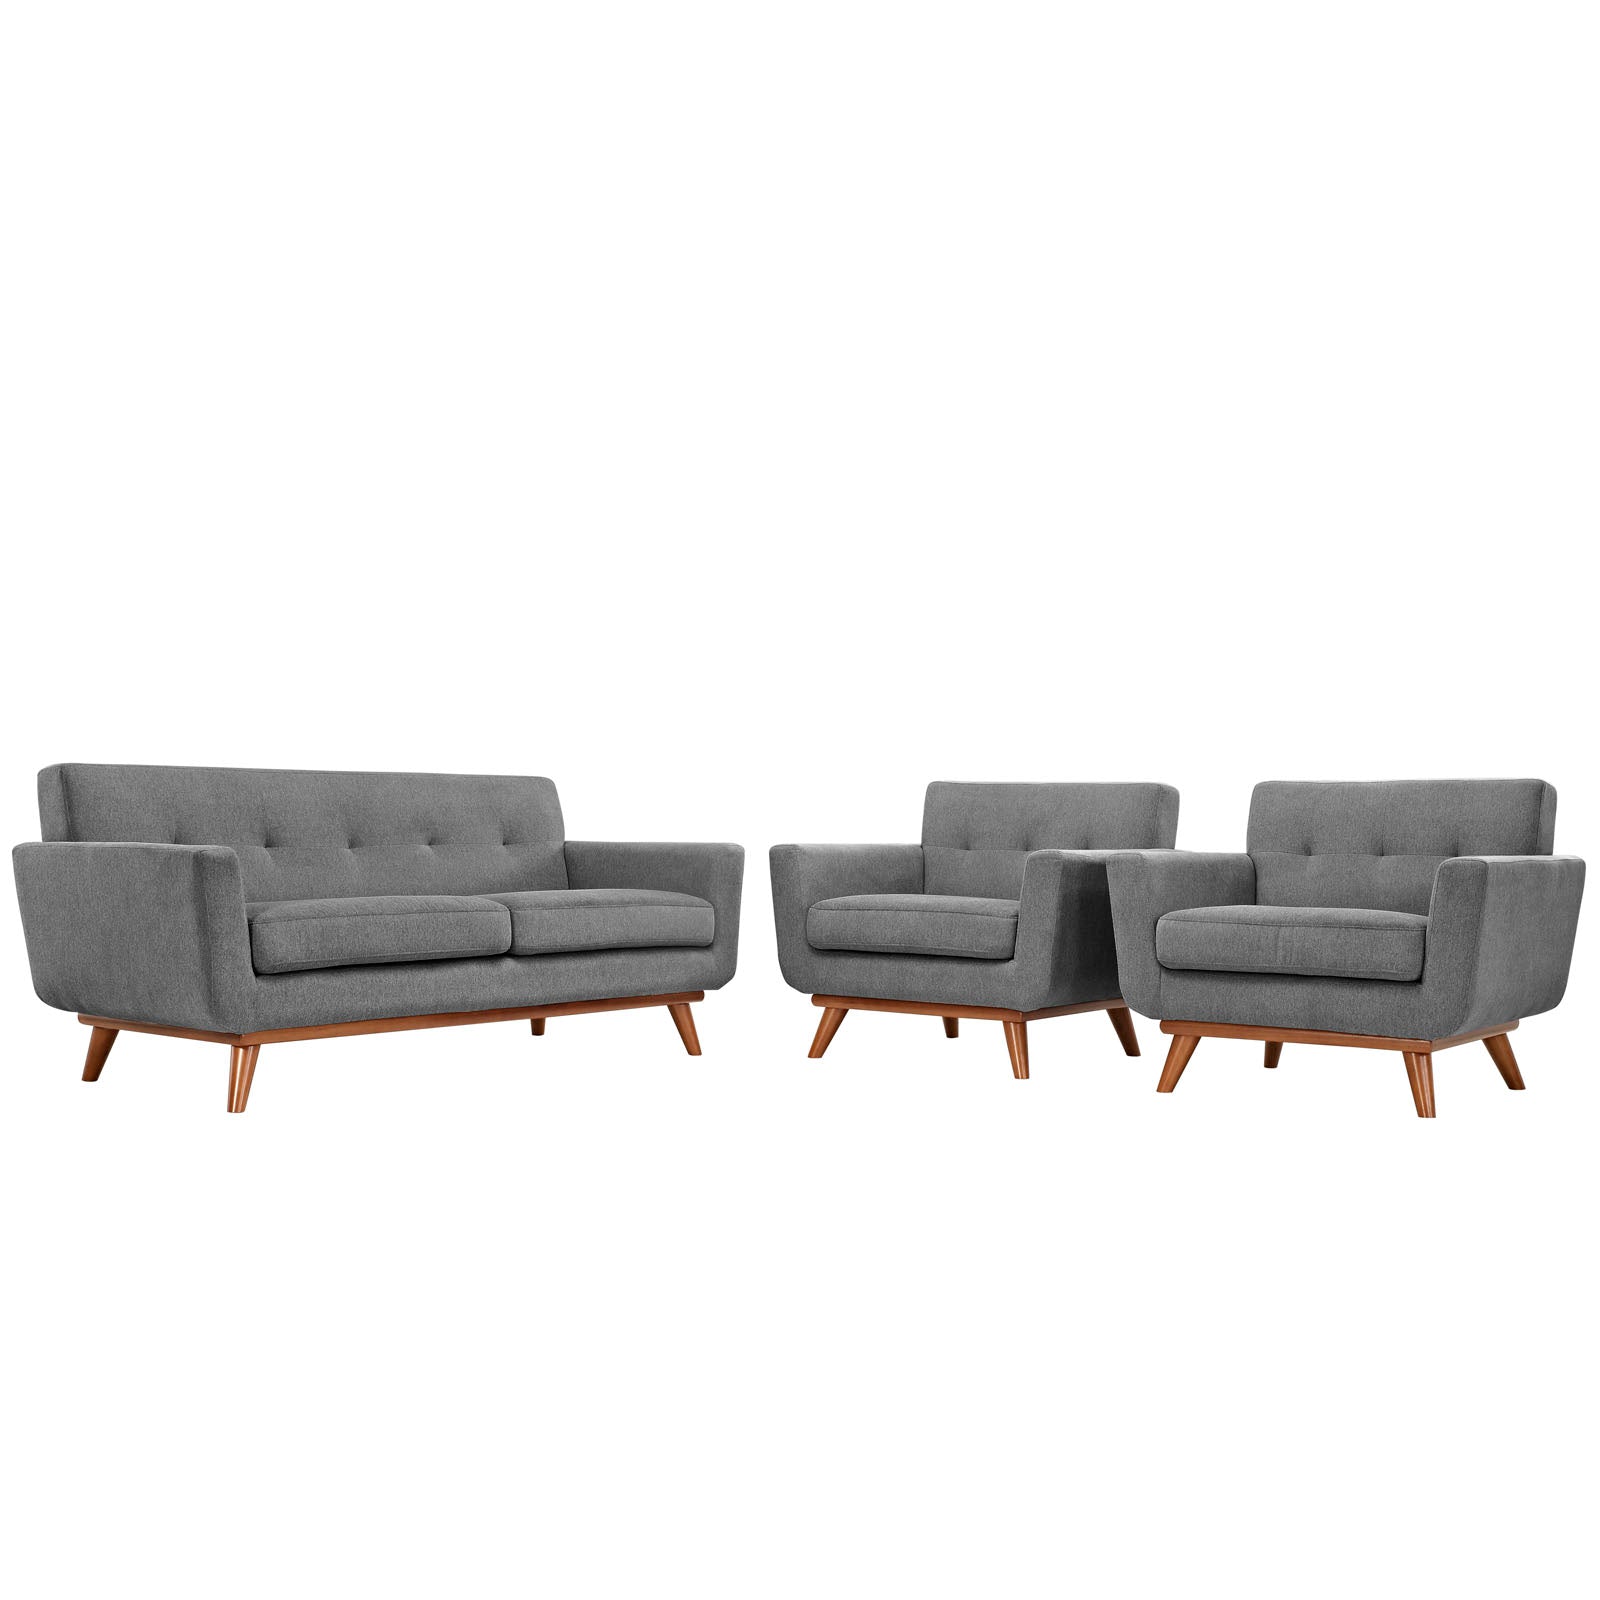 Engage Armchairs and Loveseat Set of 3 - East Shore Modern Home Furnishings